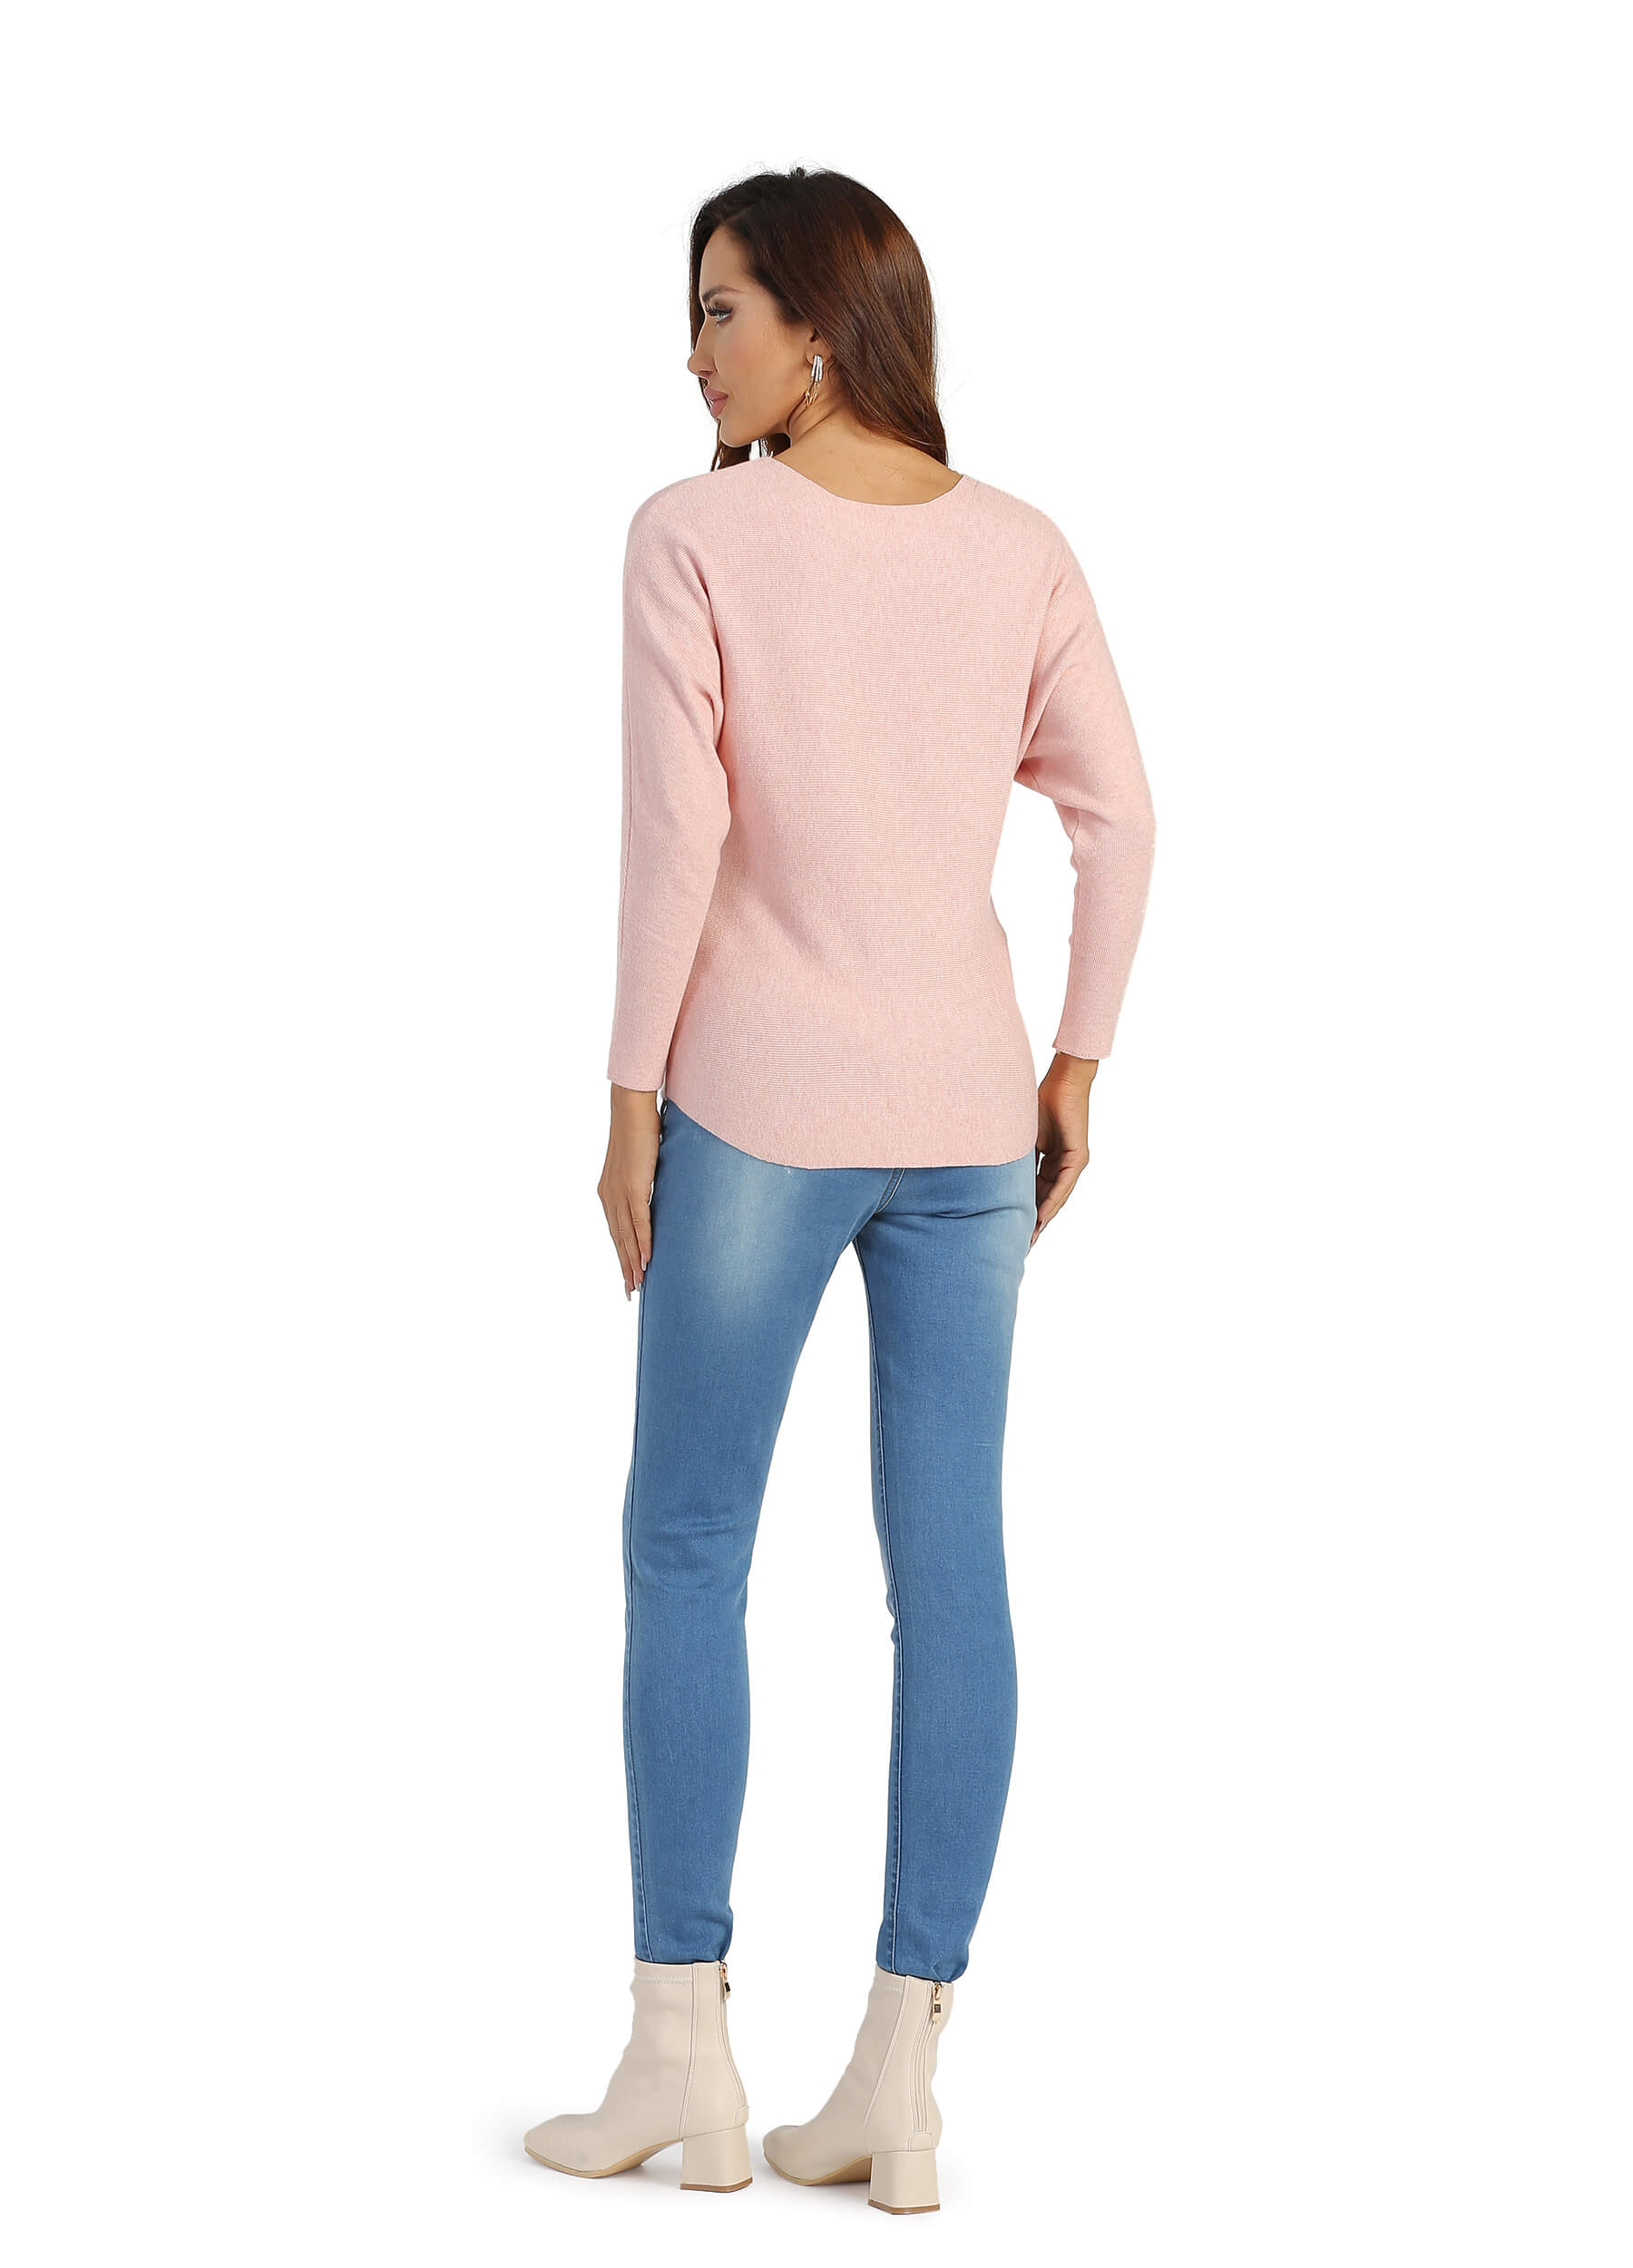 FINEPEEK Women's Fall Heart Applique Round Neck Long Sleeve Pullover Sweater-Pink